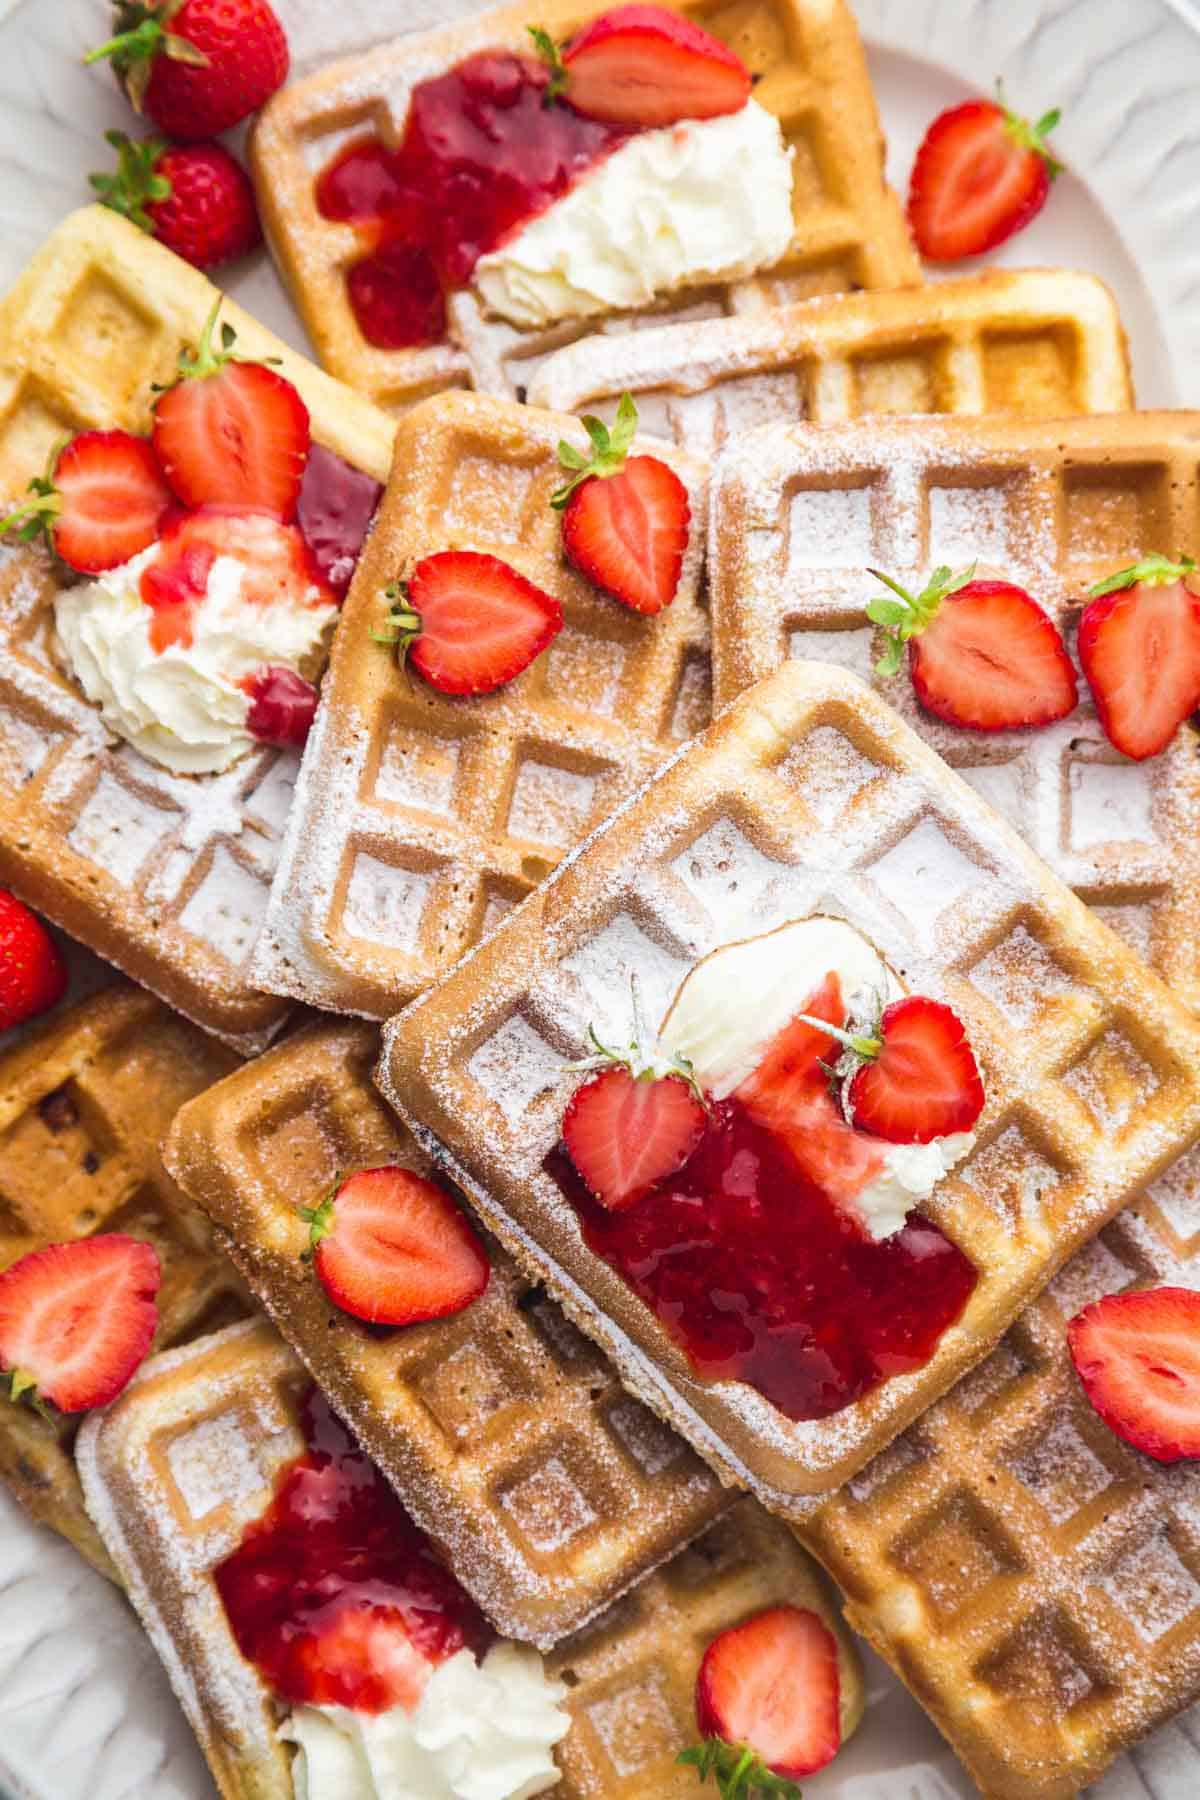 Strawberry waffles on a large white platter with a sprinkle of powdered sugar, topped with whipped cream, strawberry sauce, and fresh strawberries.